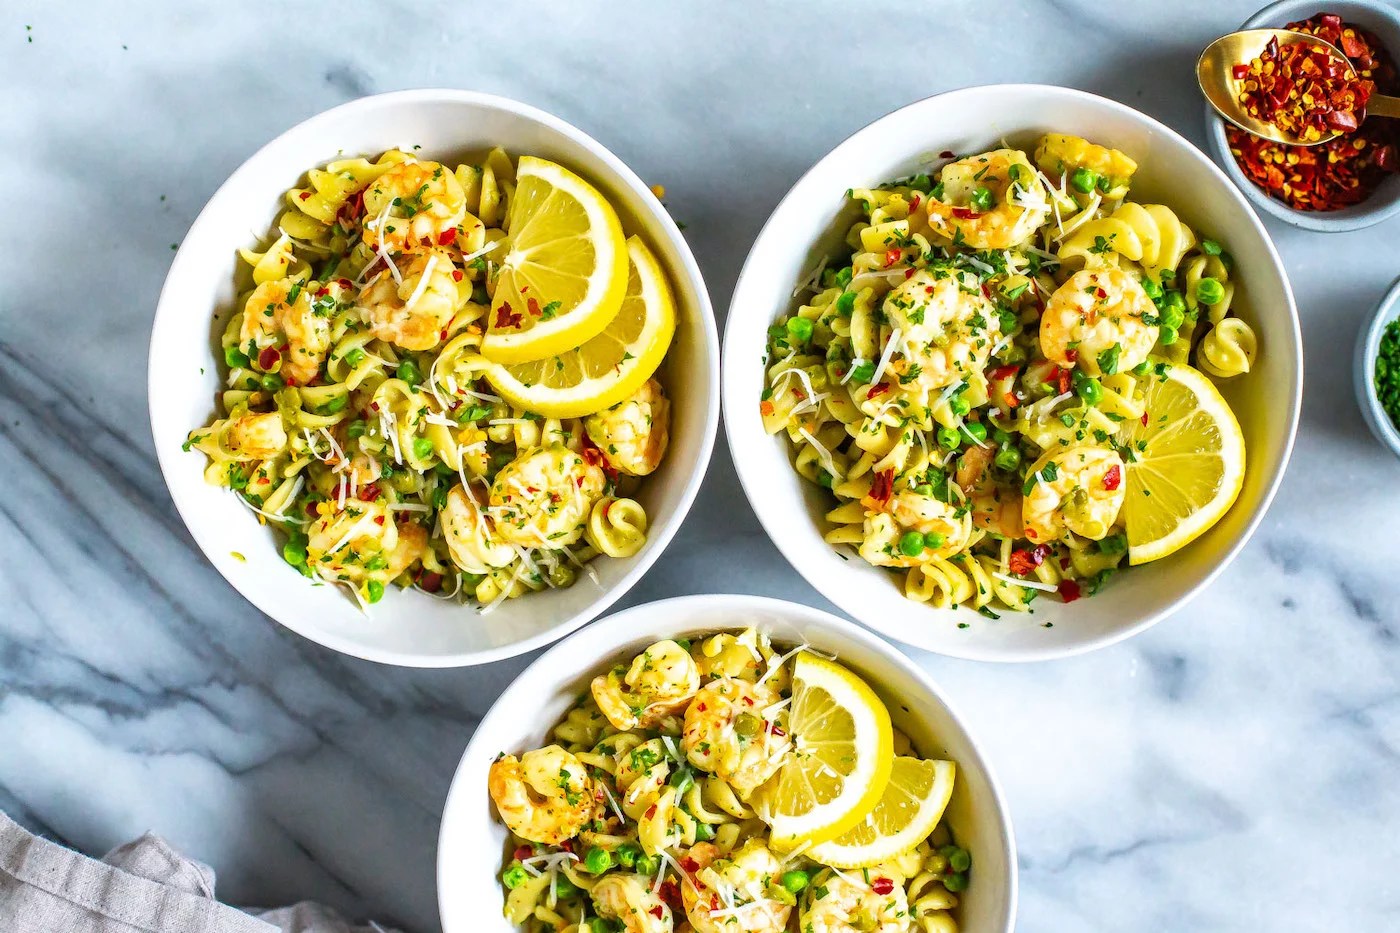 Healthy Shrimp Recipes To Make for Quick Dinners Well+Good image